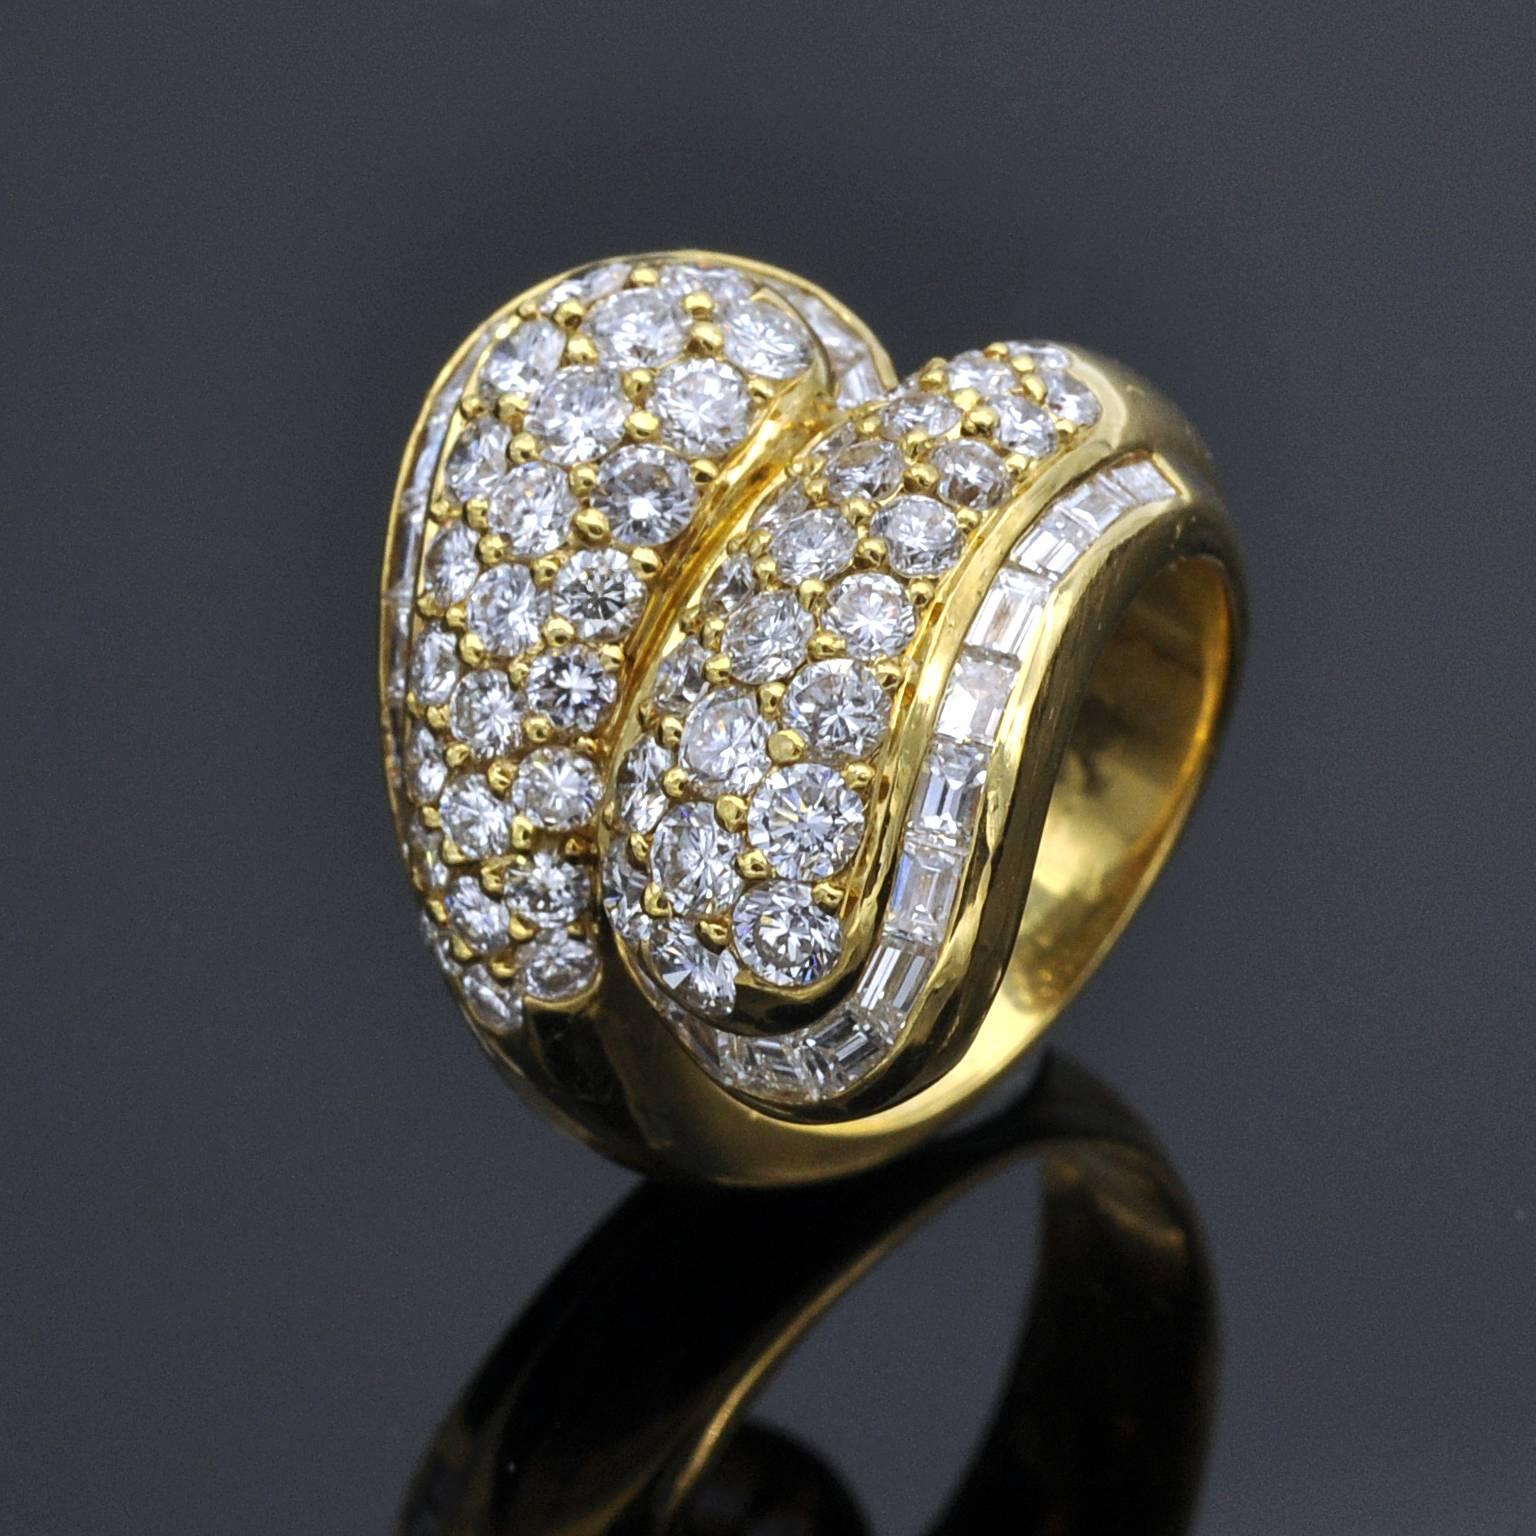 important 18 kt gold 'Toi Et Moi' ring richly set with brilliant cut and baguette diamonds. One can tell the high quality of work seeing 'beehive' openings from the back  of the ring.
Diamonds: 4.24 carat F/G in color VS in clarity
French Hallmark